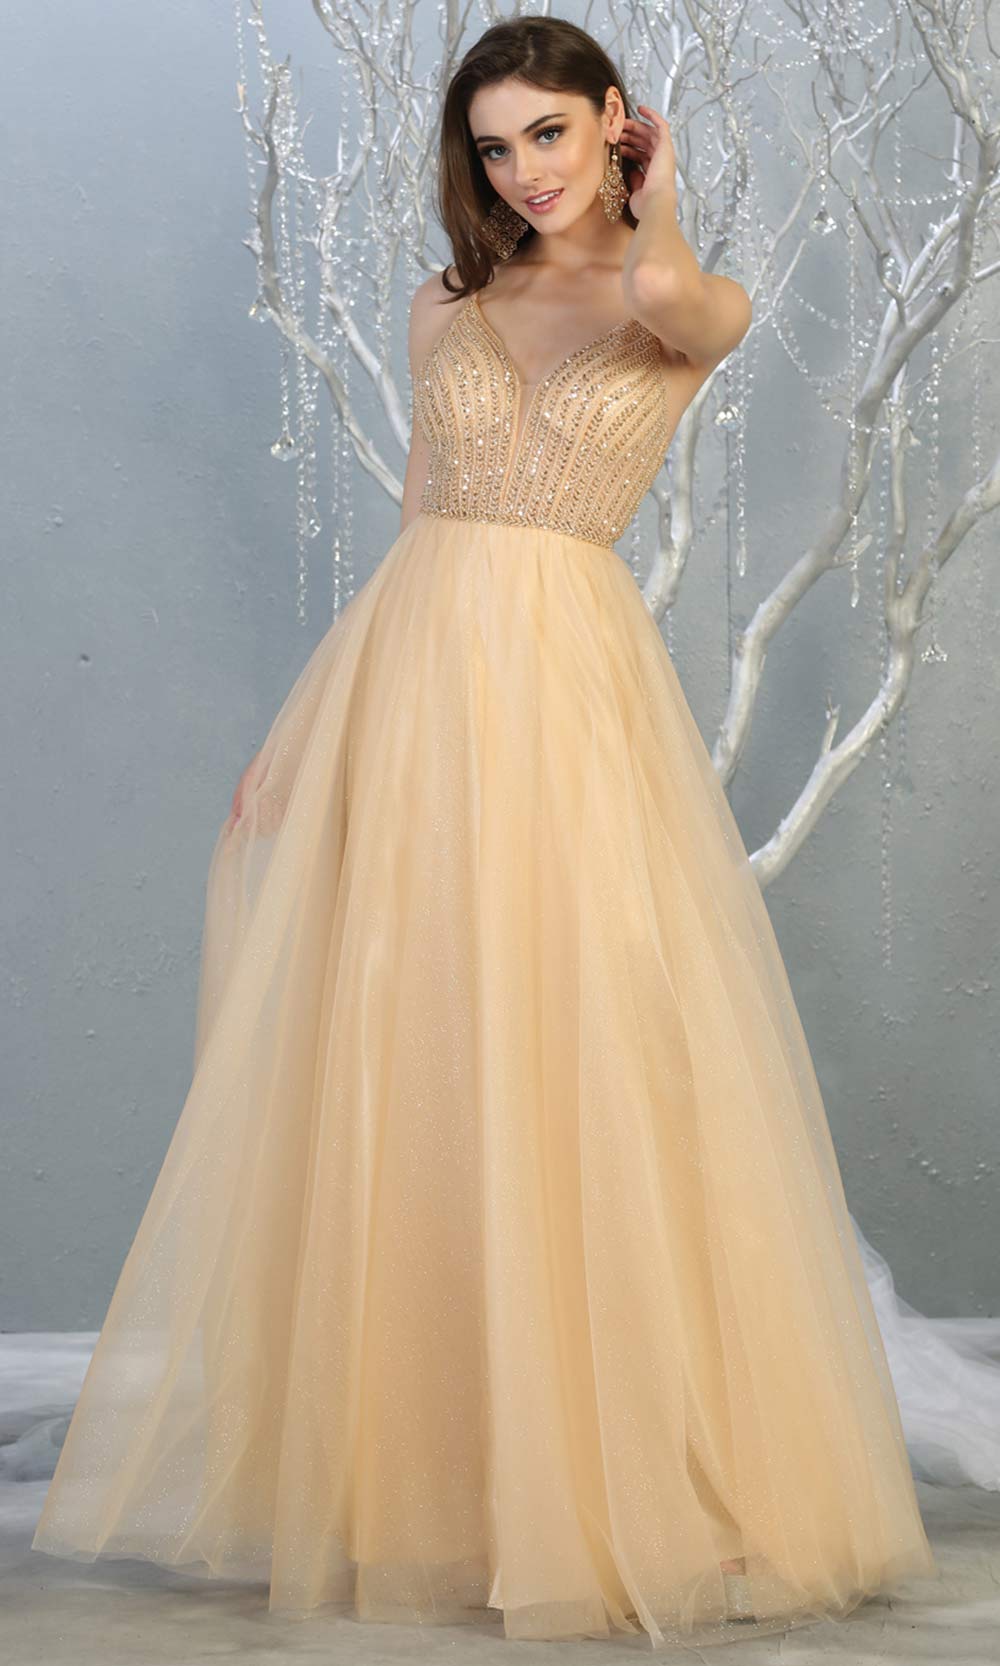 Mayqueen MQ1812 long champagne v neck evening flowy tulle dress. Full length light gold beaded top w/wide straps is perfect for  enagagement/e-shoot dress, formal wedding guest, indowestern gown, evening party dress, prom, bridesmaid. Plus sizes avail.jpg